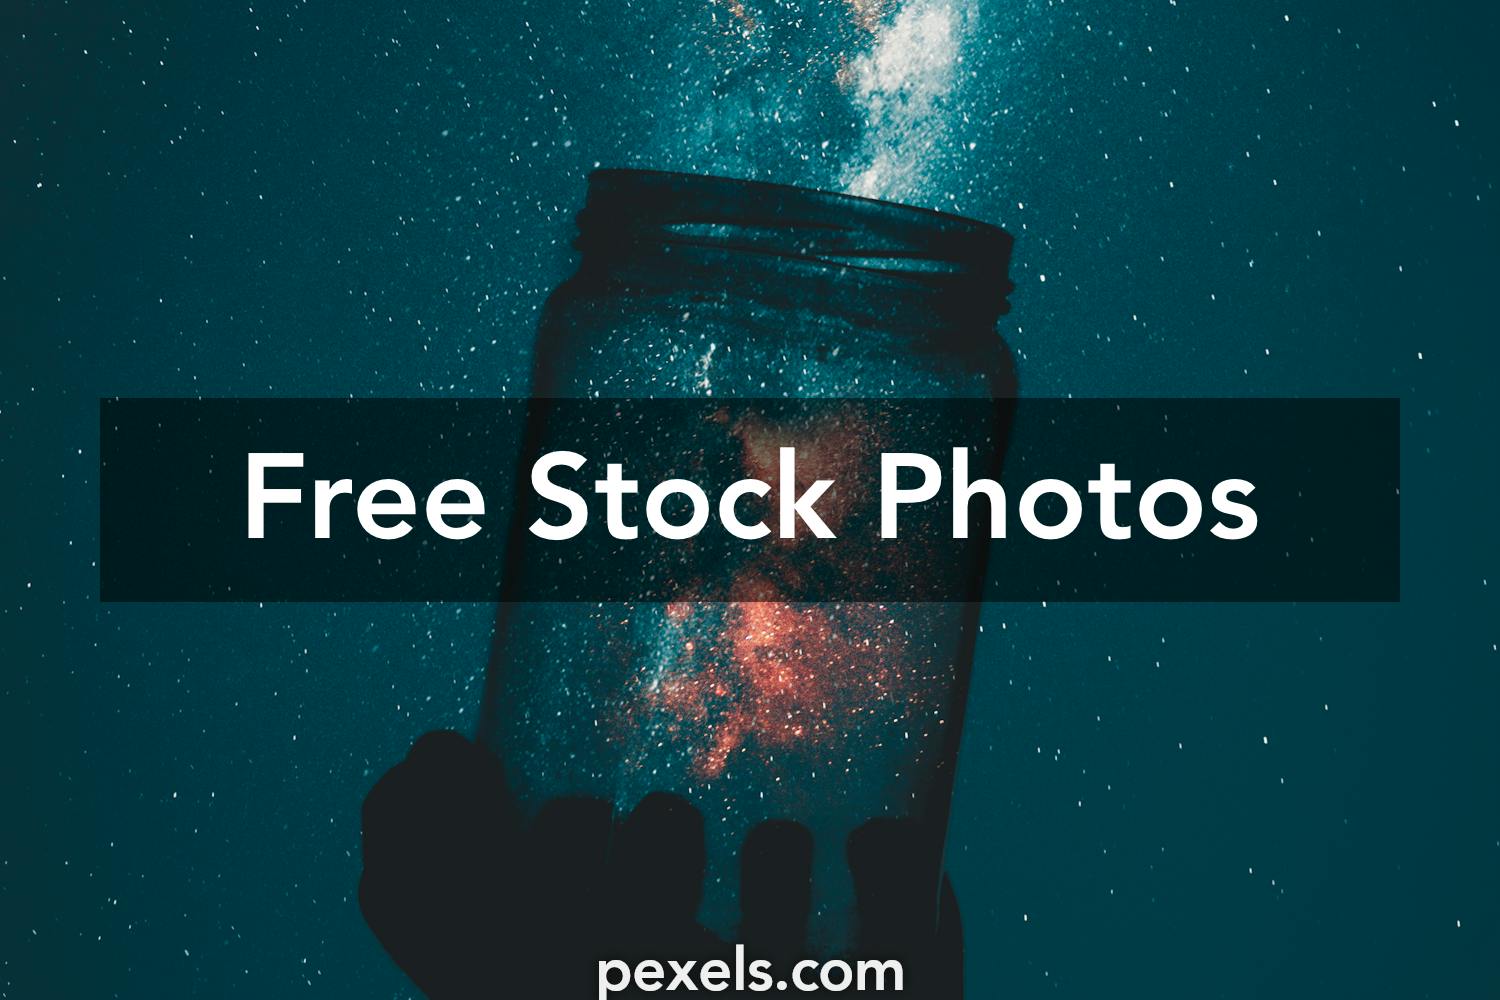 Creative Photos, Download The BEST Free Creative Stock Photos & HD Images